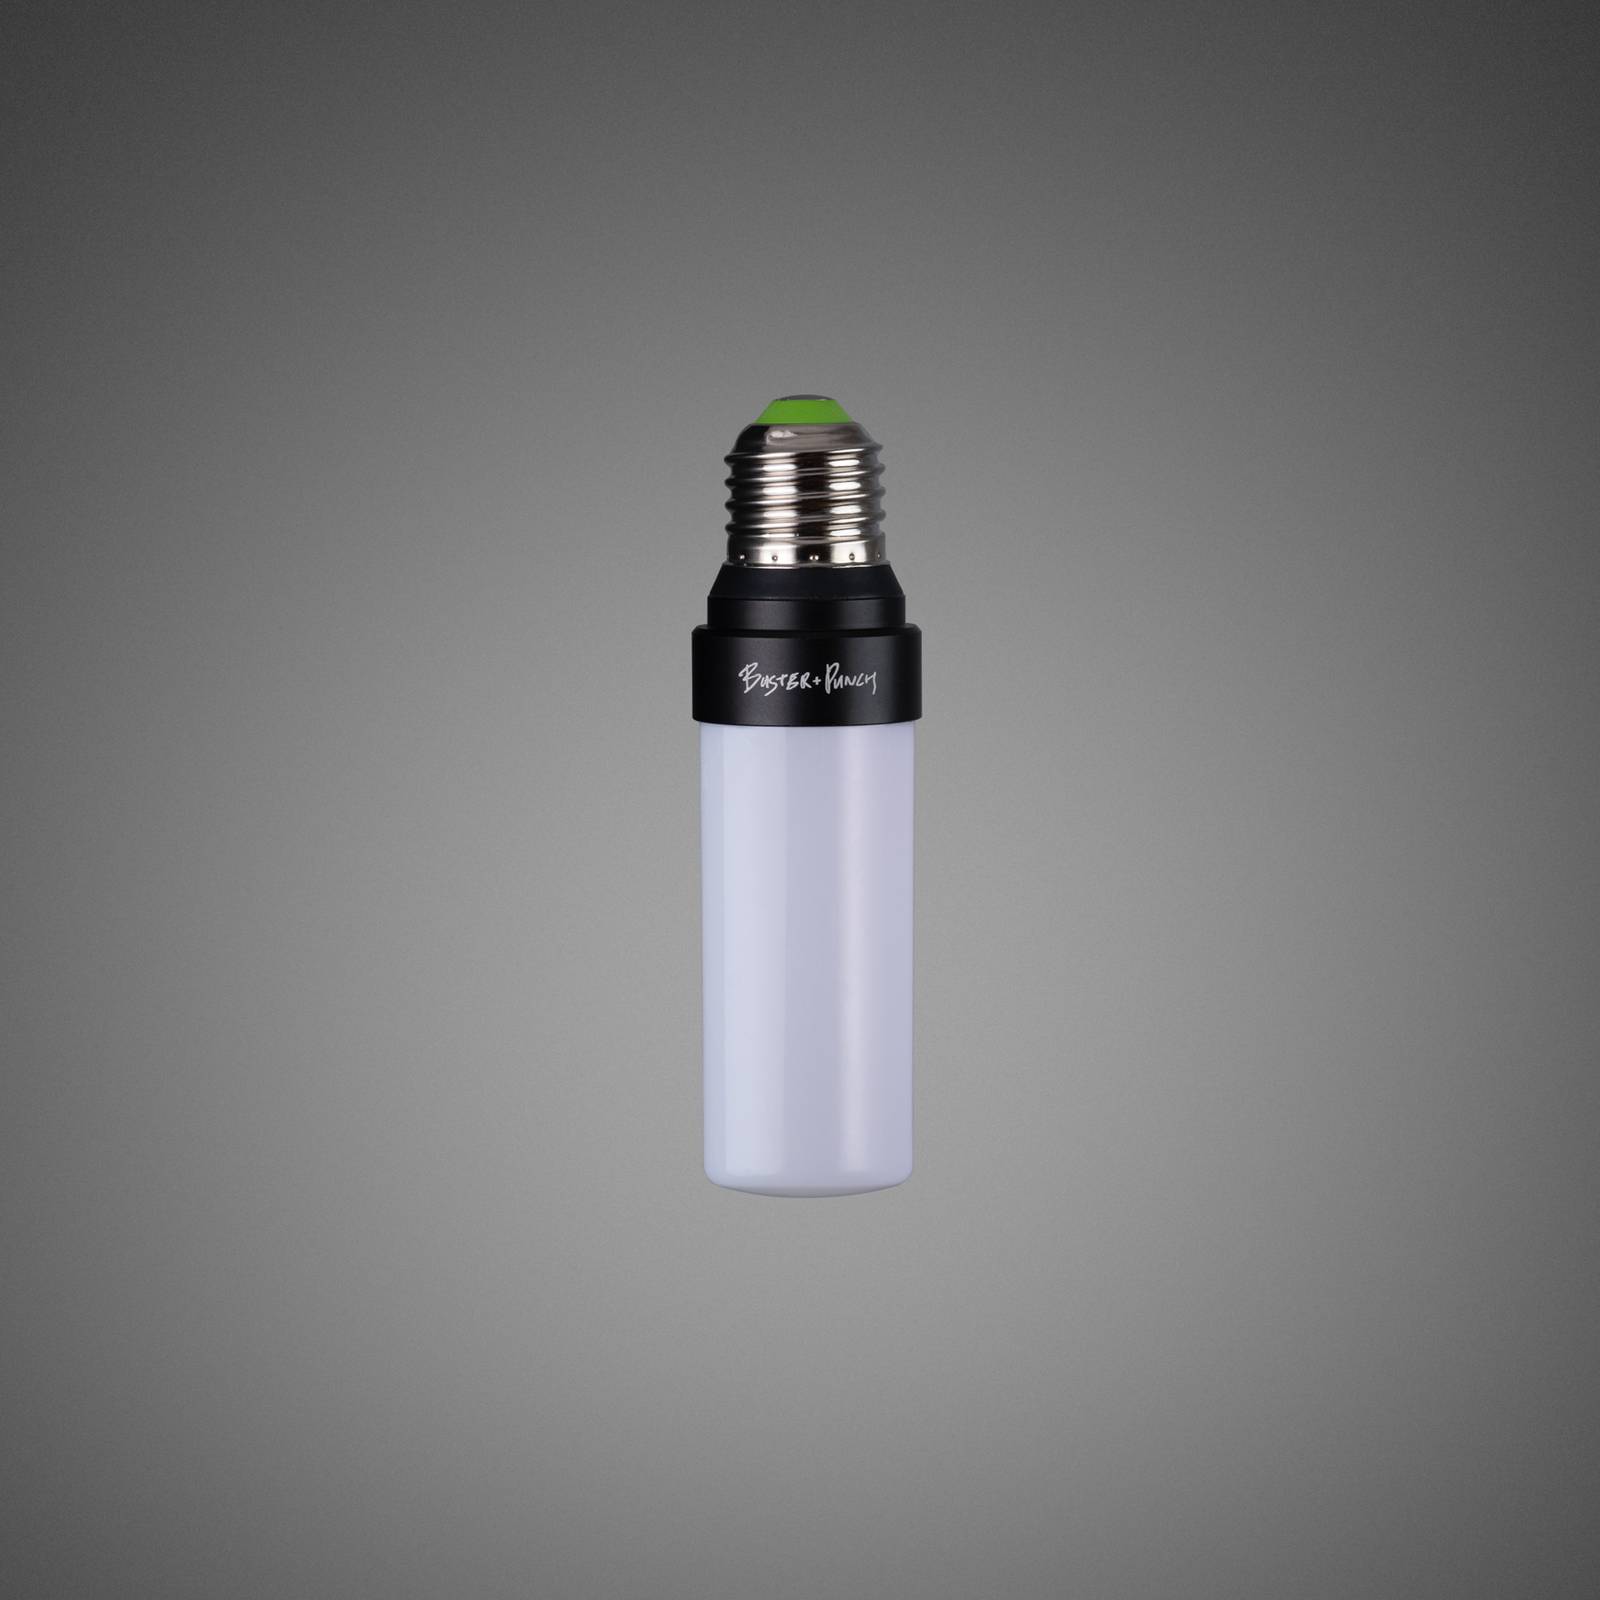 Buster + Punch LED-Lampe E27 5W 2.700K dimmbar von Buster + Punch